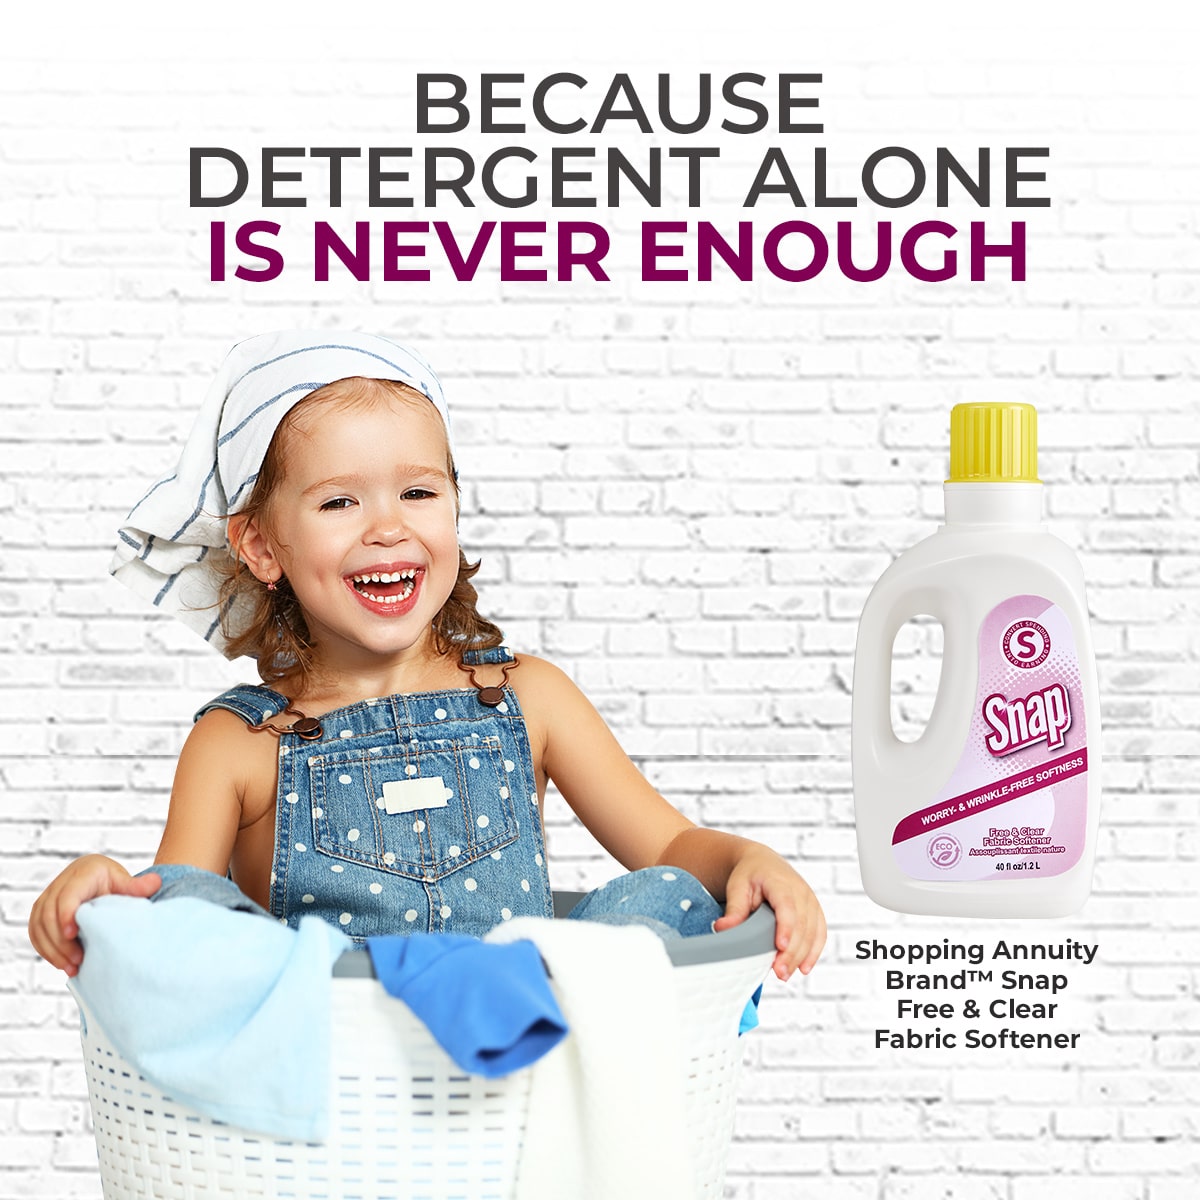 Snap Free & Clear Fabric Softener. Cleaner Softer Clothes with no added dyes of fragrances. Picture shows product container next to a happy baby wrapped in a towel.